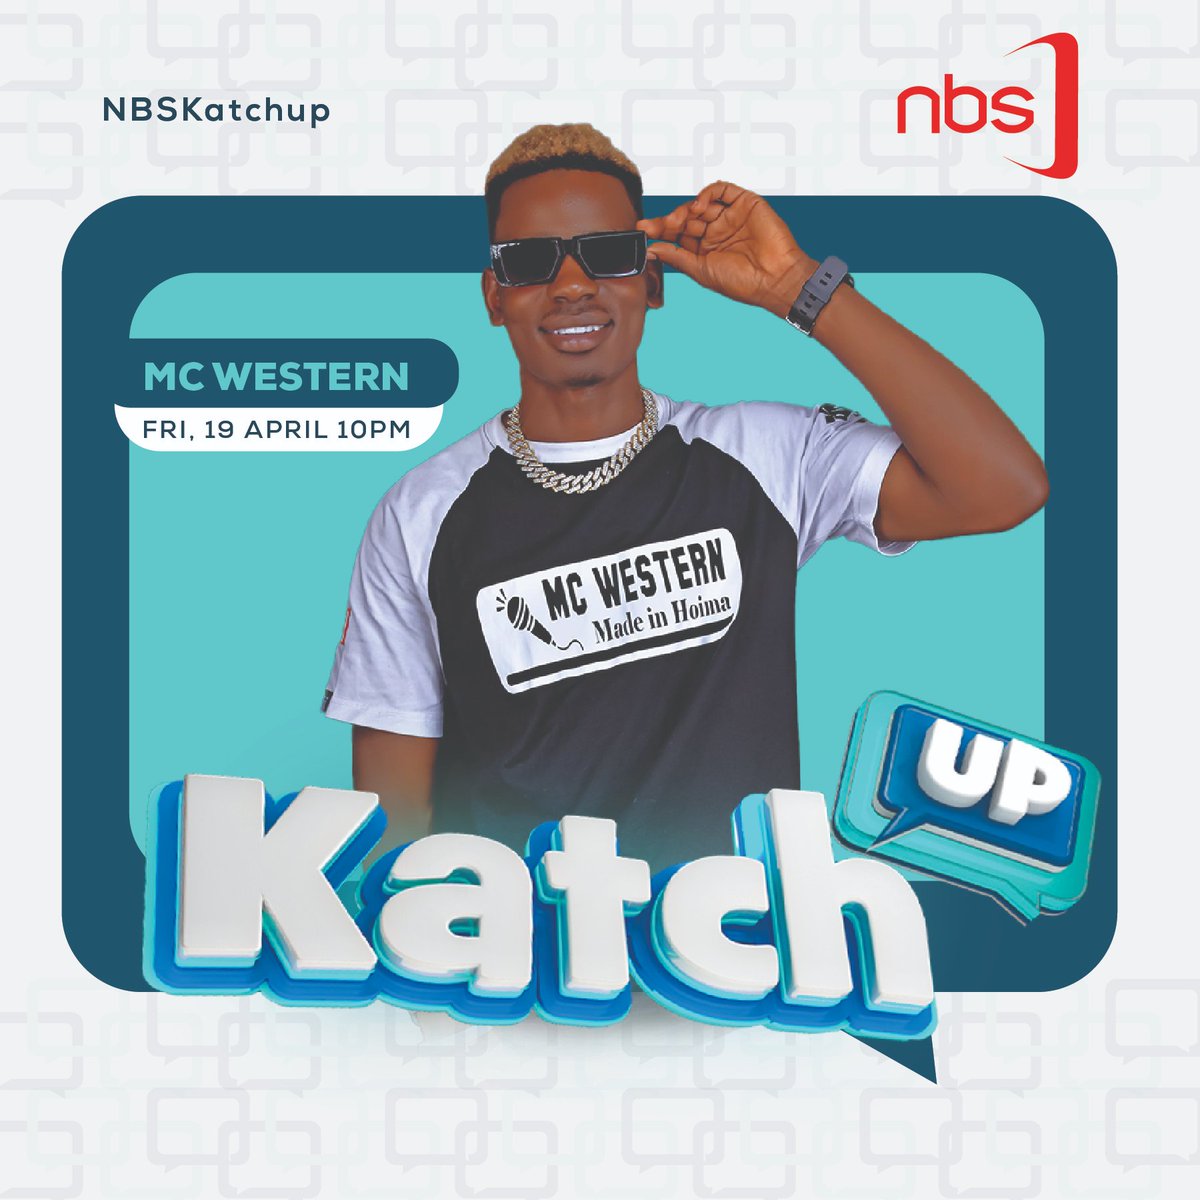 Get ready for a night of energy and vibes with MC Western on #NBSKatchUp! 🎶 Tune in as we groove to the best tunes and make tonight unforgettable. #NBSUpdates